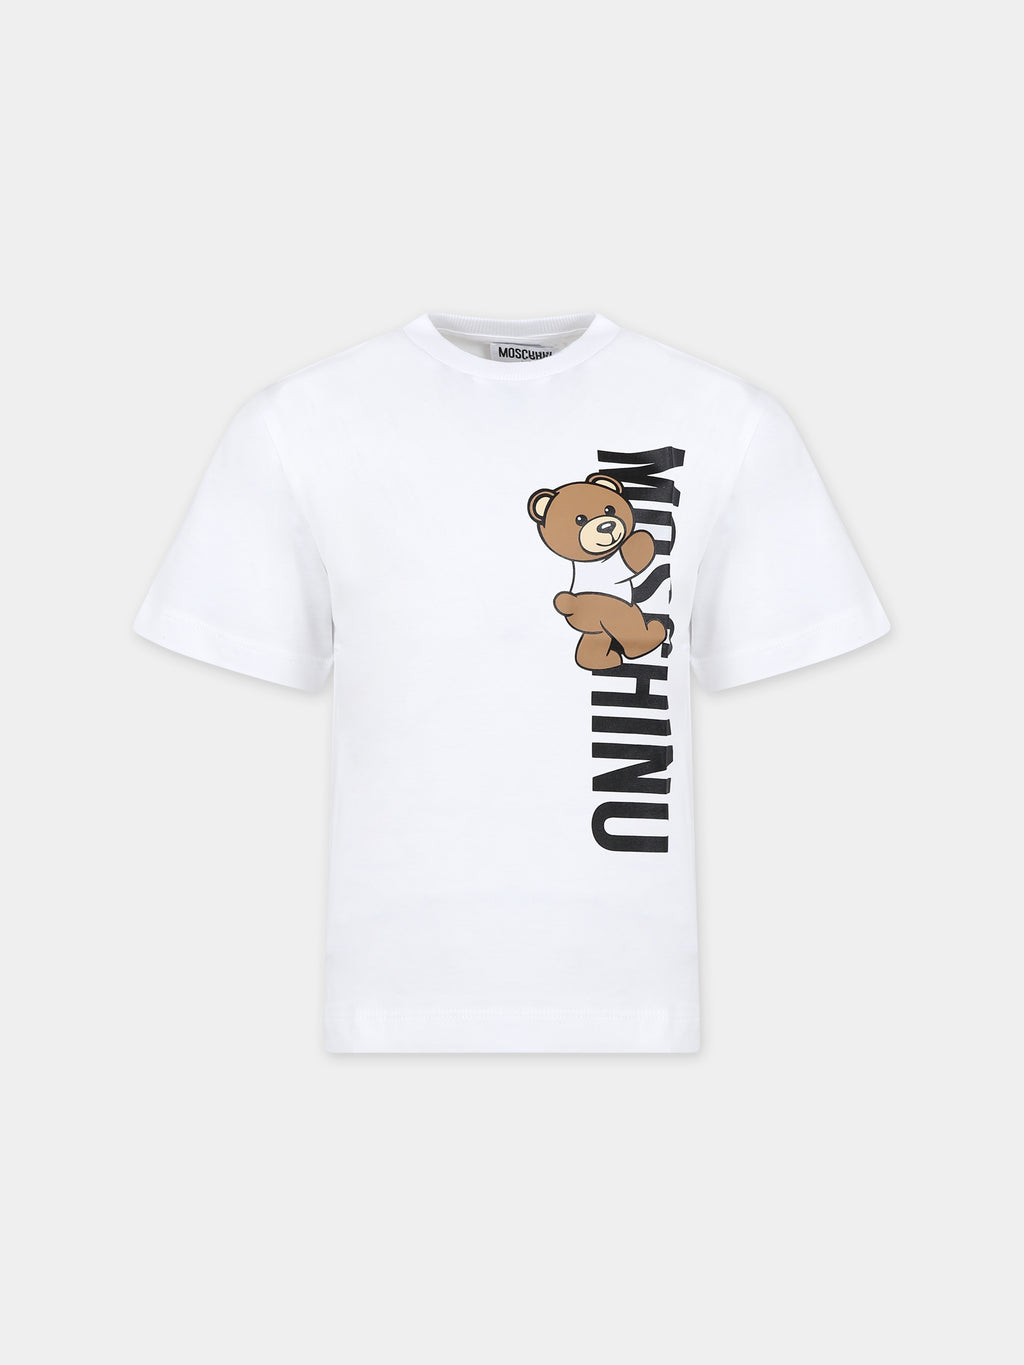 White t-shirt for kids with Teddy Bear and logo